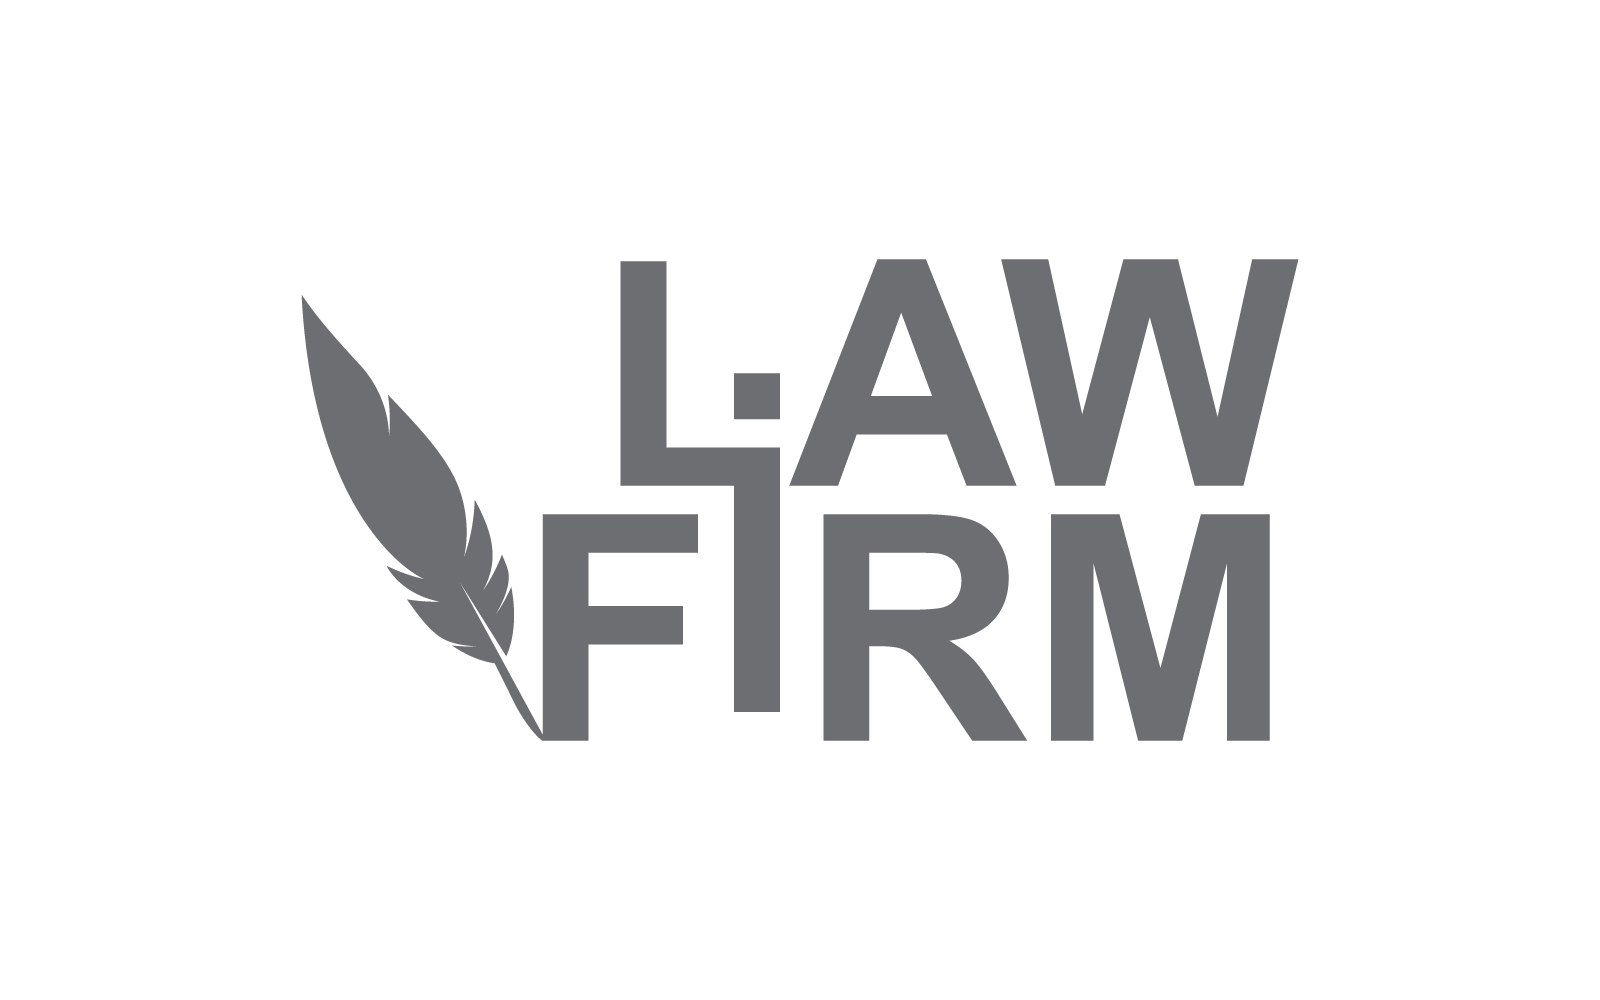 Law firm Feather illustration logo icon vector flat design template Logo Template